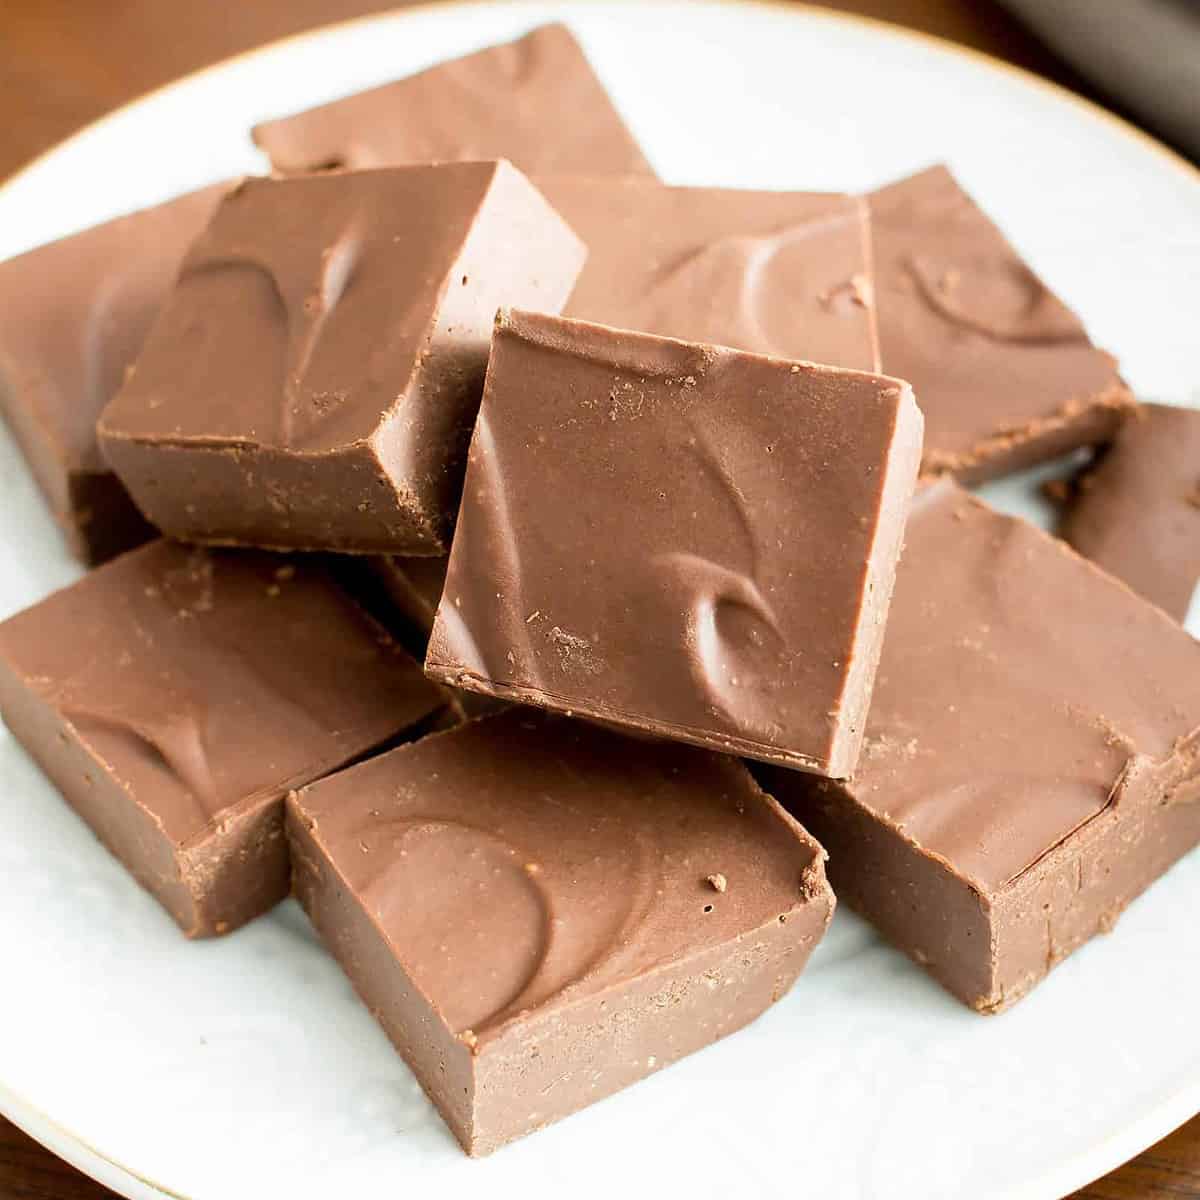  Whip up a batch of this vegan fudge for a guilt-free treat anytime.